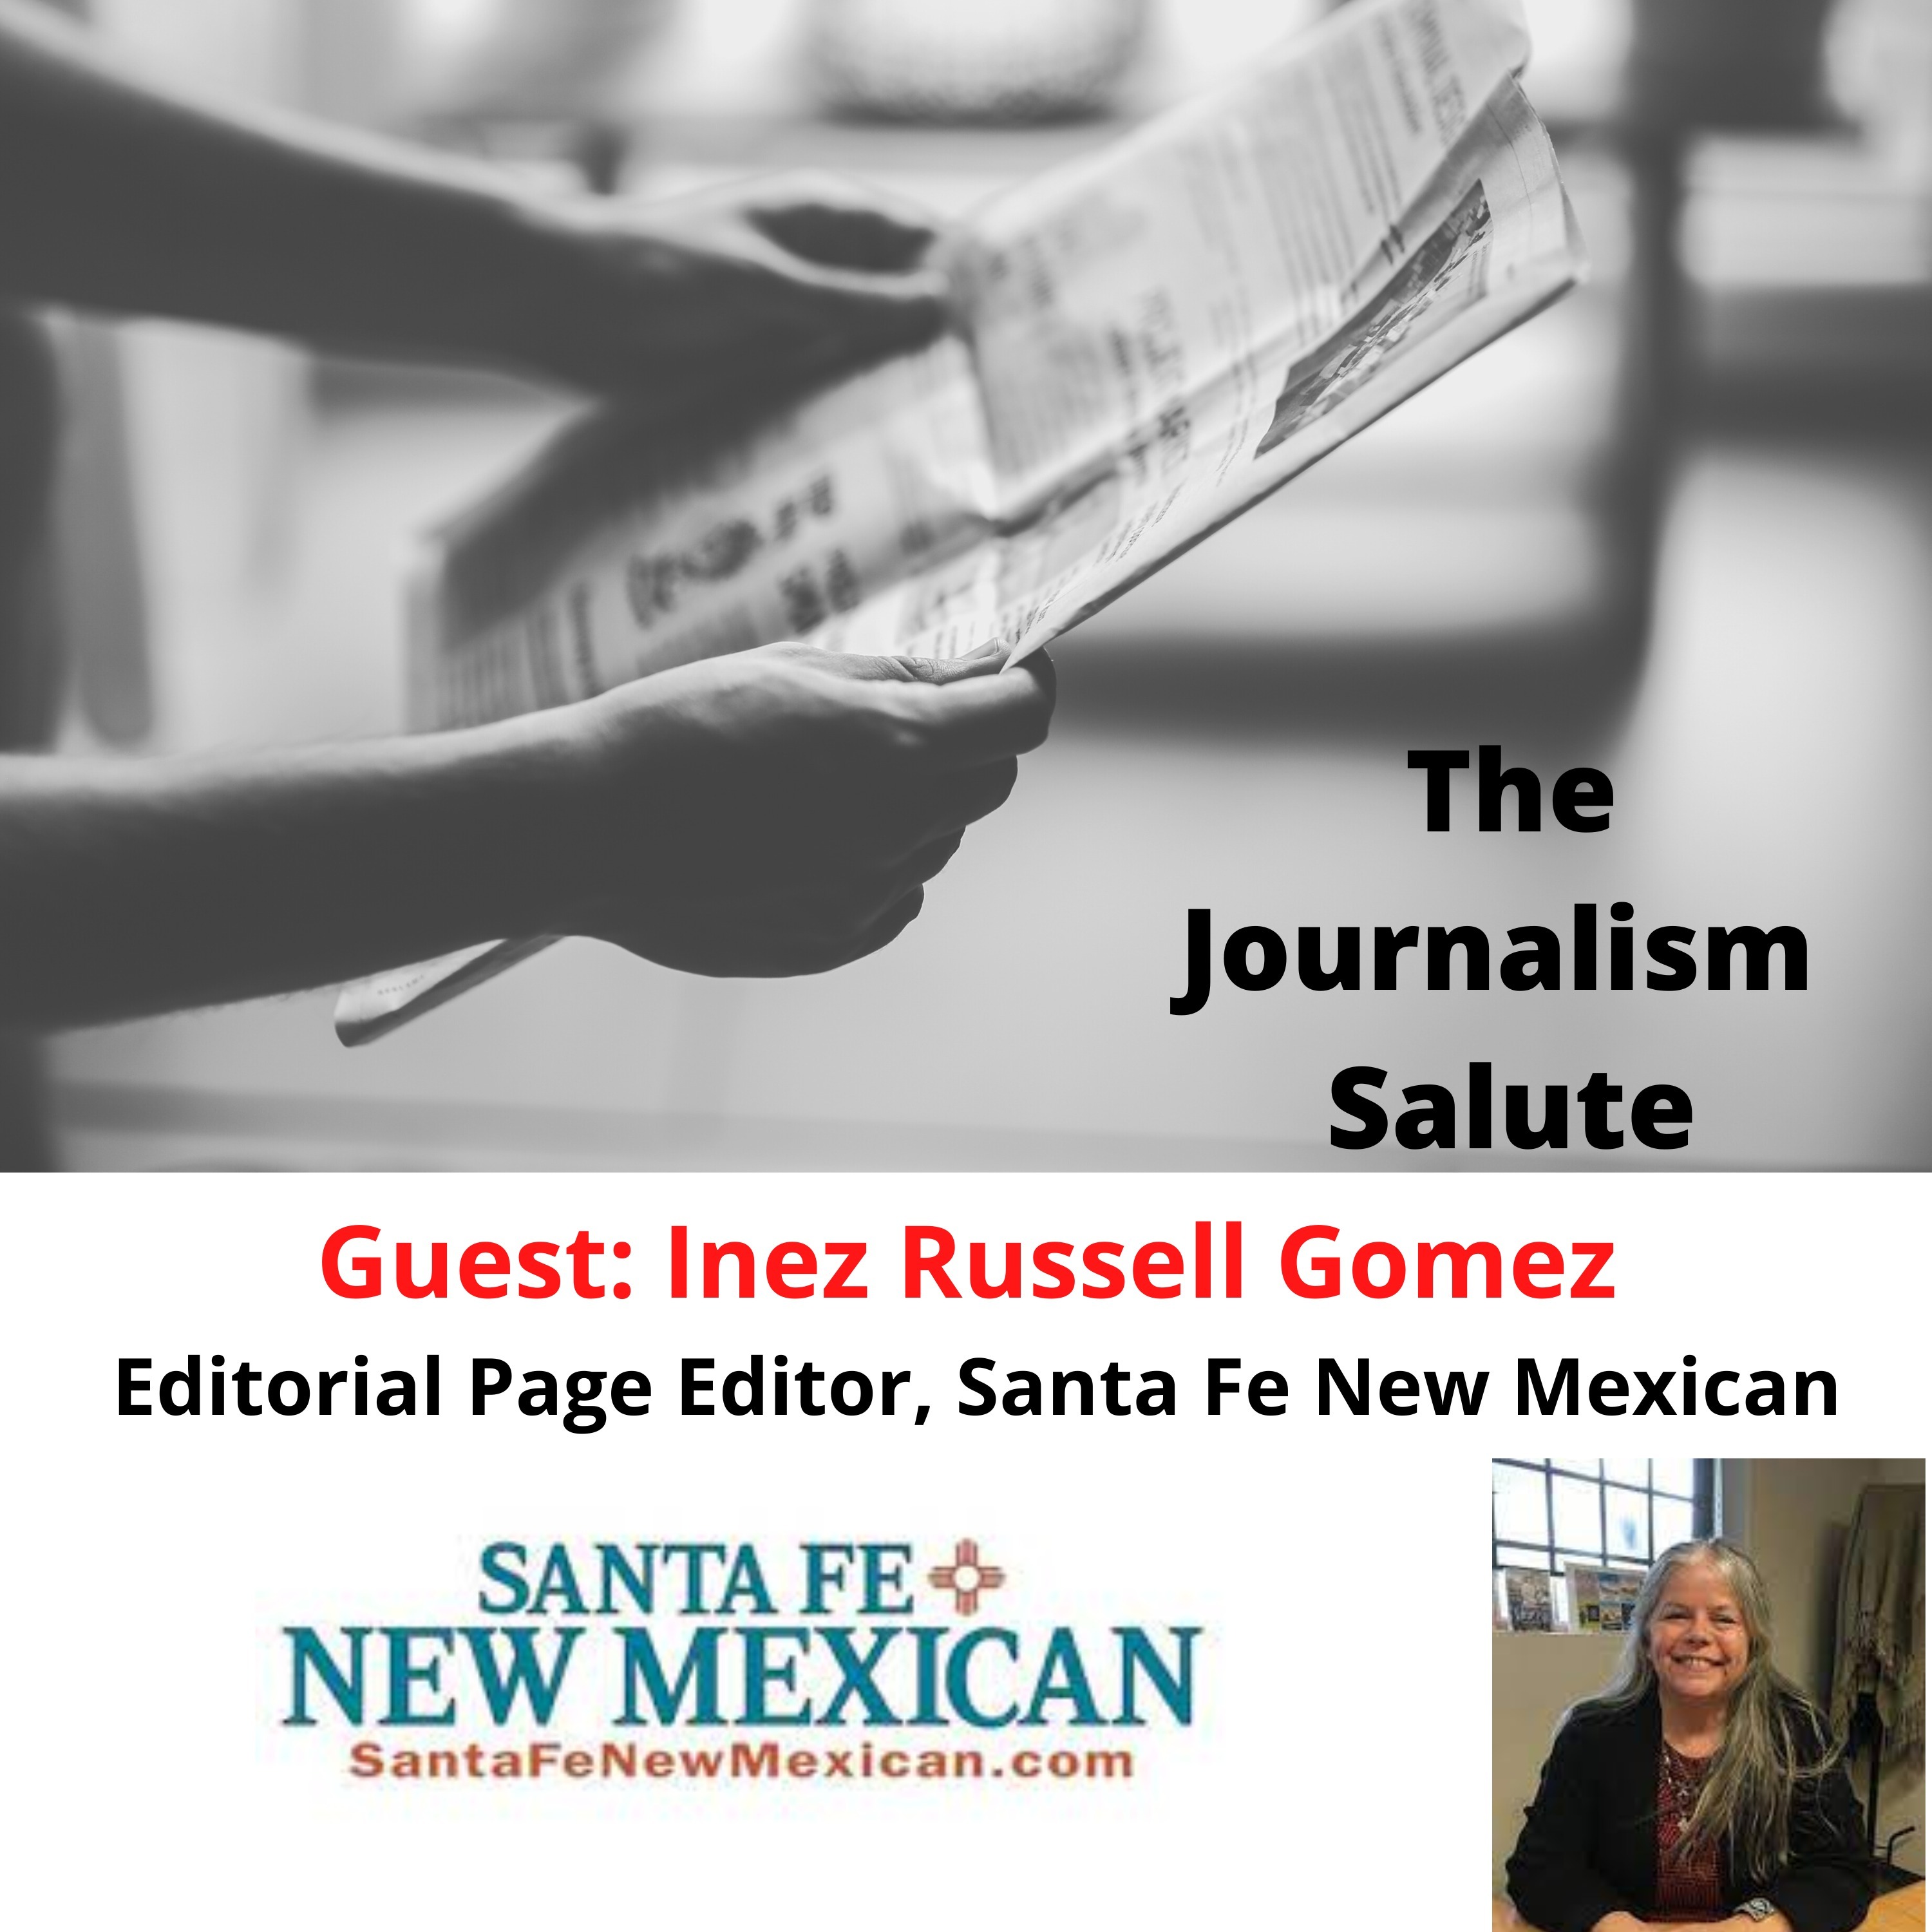 Inez Russell Gomez, Editorial Page Editor at The Santa Fe New Mexican